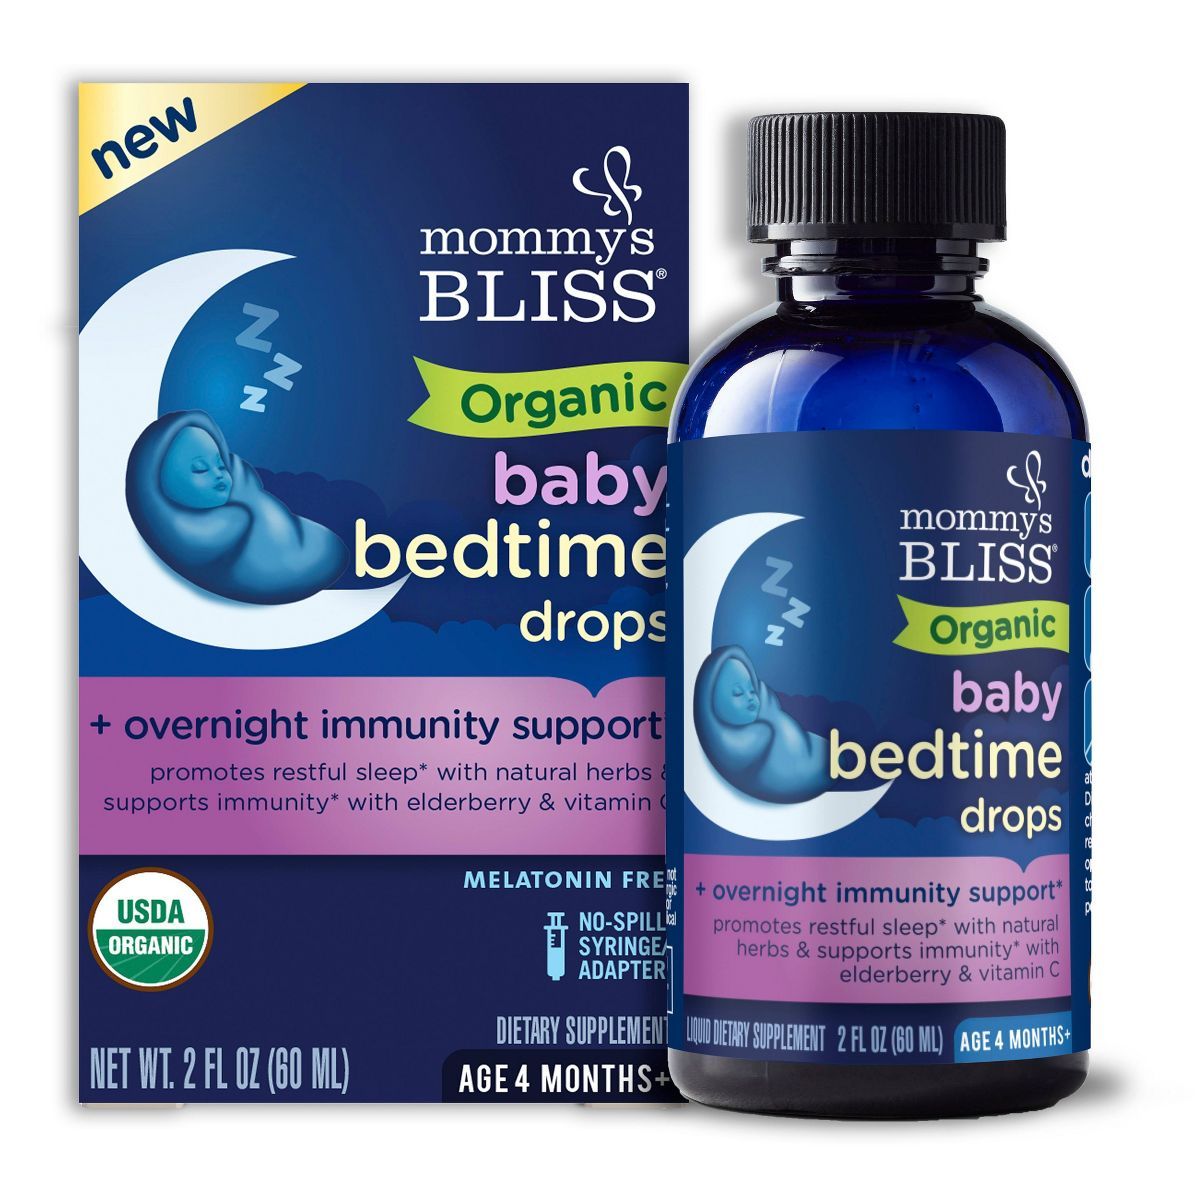 Mommy's Bliss Organic Baby Bedtime Drops + Immunity Support - 2 fl oz | Target